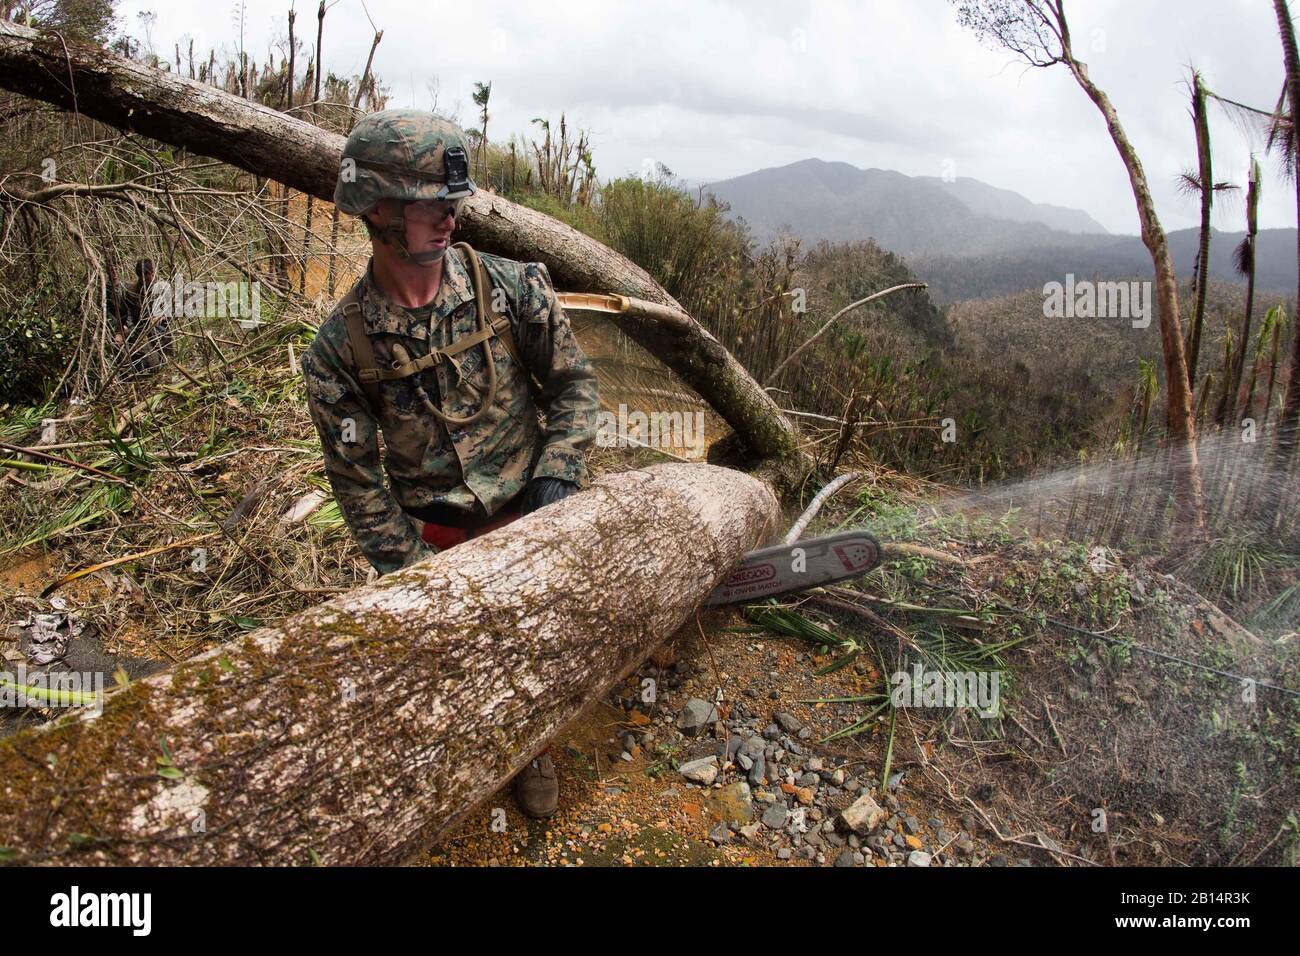 A U.S. Marine with Battalion Landing Team 2nd Battalion, 6th Marine Regiment, 26th Marine Expeditionary Unit (MEU), uses a chainsaw to cut a tree blocking a road as part of Hurricane Maria relief efforts in Ceiba, Puerto Rico, Sept. 27, 2017. The 26th MEU is supporting the Federal Emergency Management Agency, the lead federal agency, and local authorities in Puerto Rico with the combined goal of protecting the lives and safety of those in affected areas. (U.S. Marine Corps photo by Lance Cpl. Alexis C. Schneider) Stock Photo